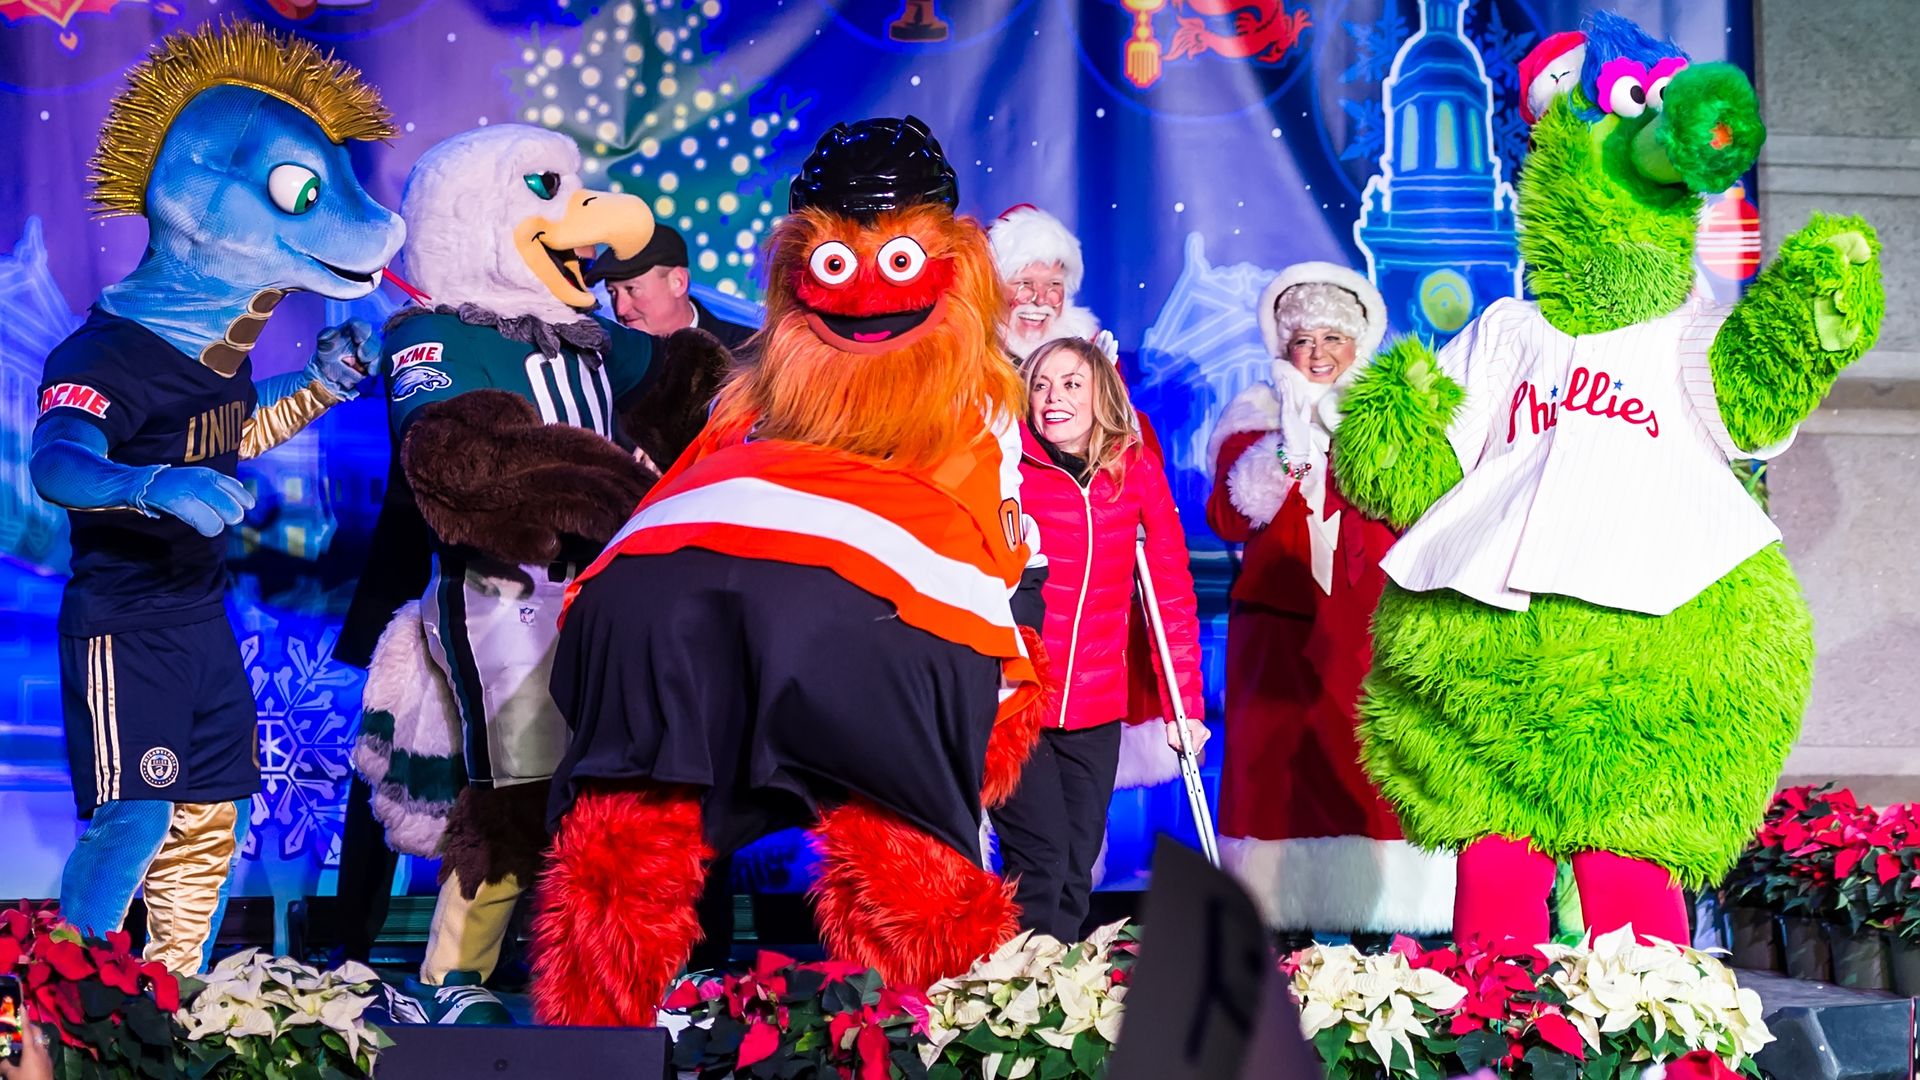 Philadelphia mascots Phang, Swoop, Gritty and Phanatic, alongside Santa Claus and Mrs. Claus stand on stage during the city's 2018 Holiday Tree Lighting.